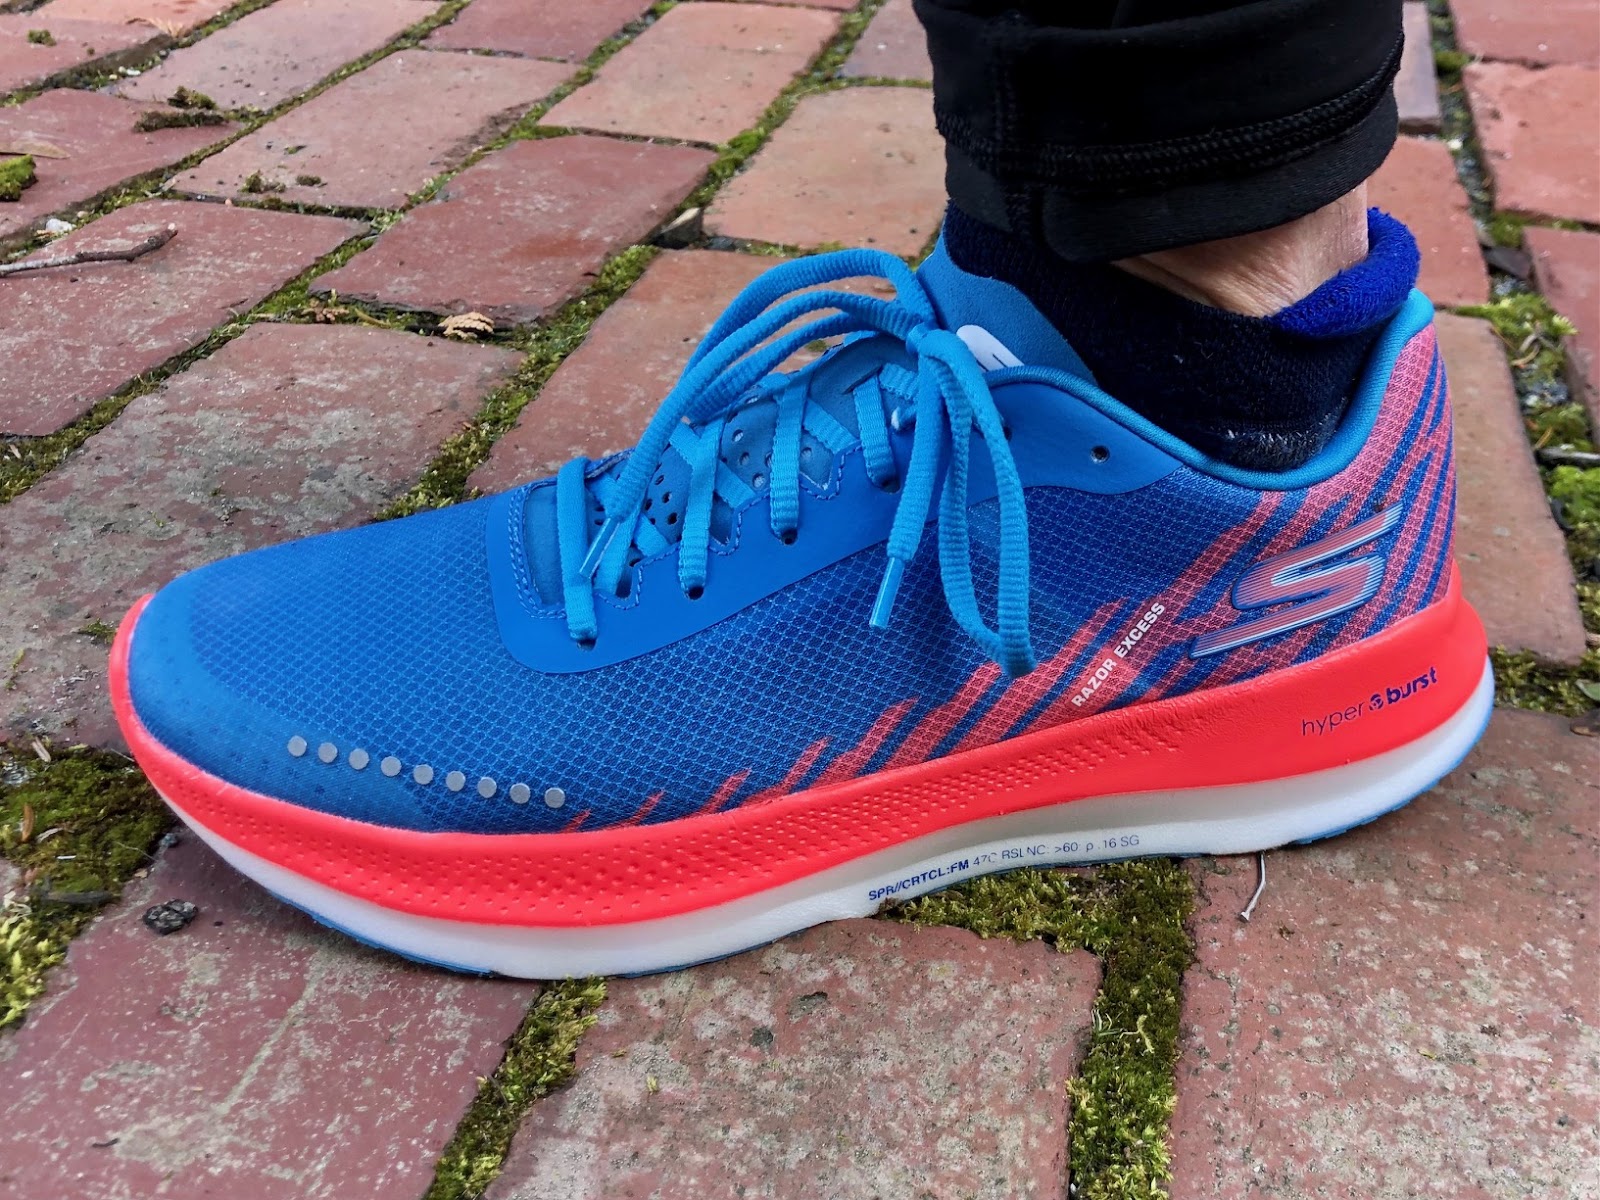 Road Trail Run: Skechers Performance GO Run Razor Excess Multi Tester  Review: Smooth, Efficient, Peppy, Light, and Reasonably Priced